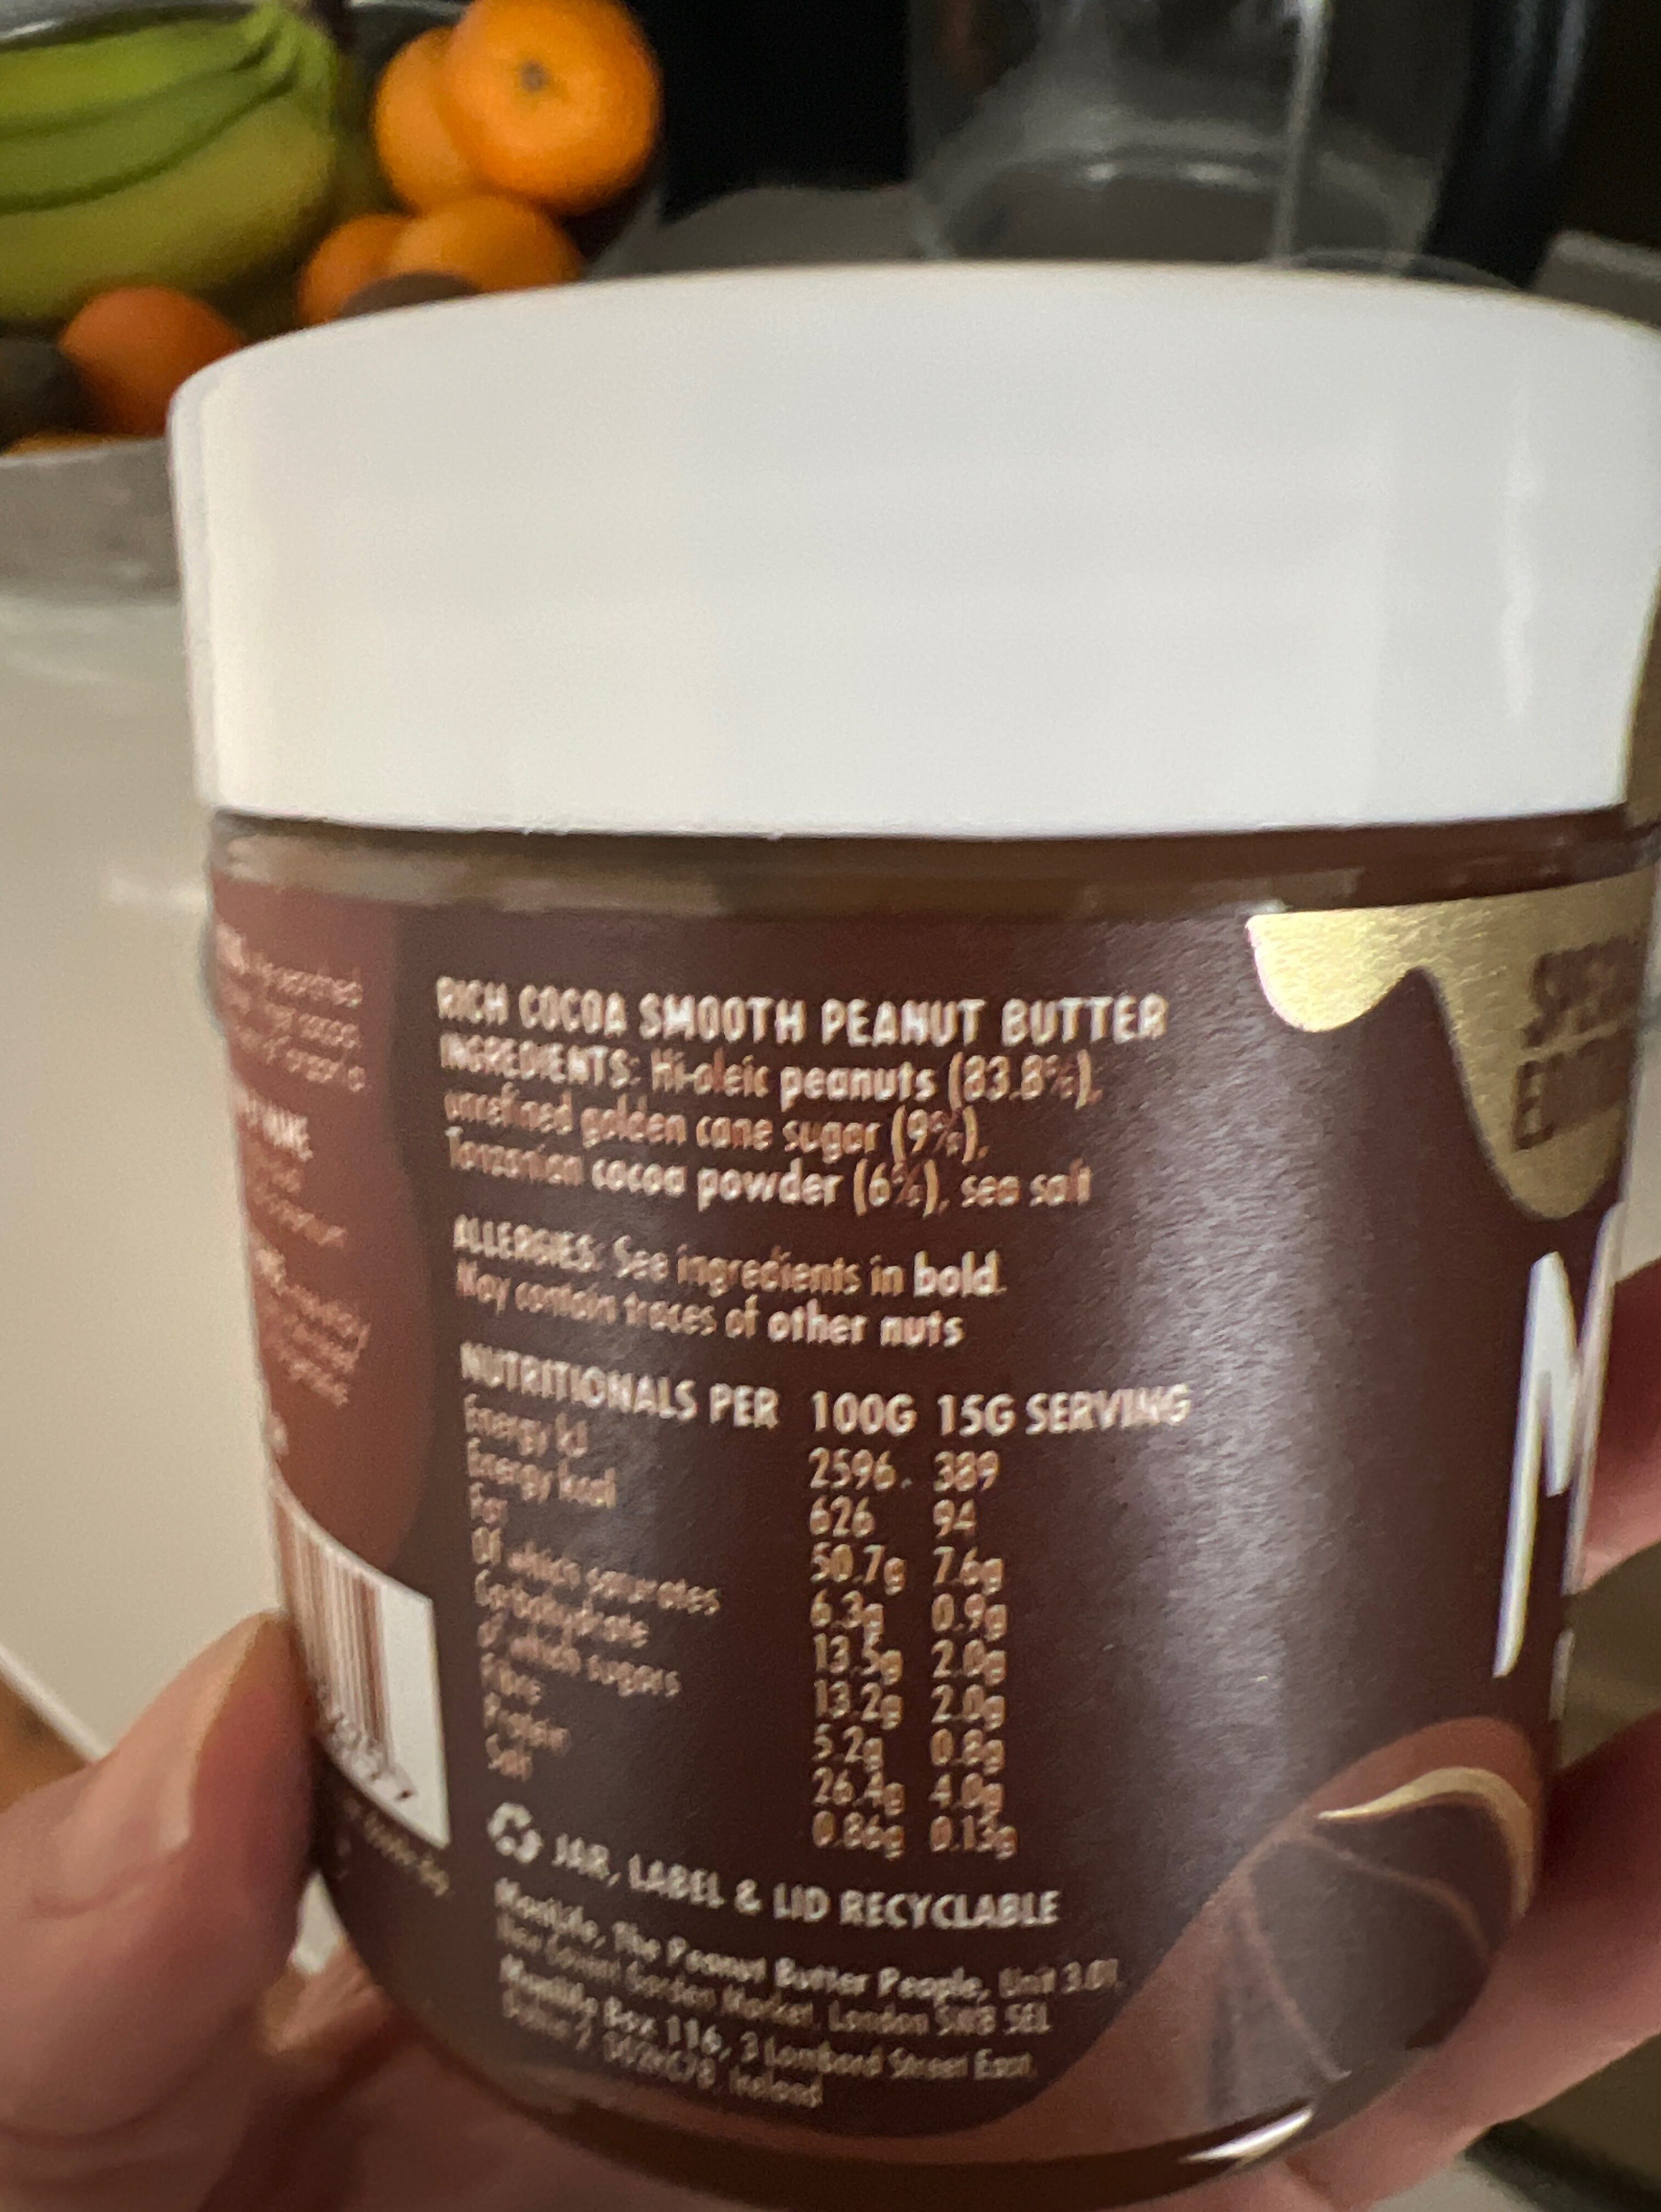 Manilife Rich Cocoa Smooth Peanut Butter - Ingredients